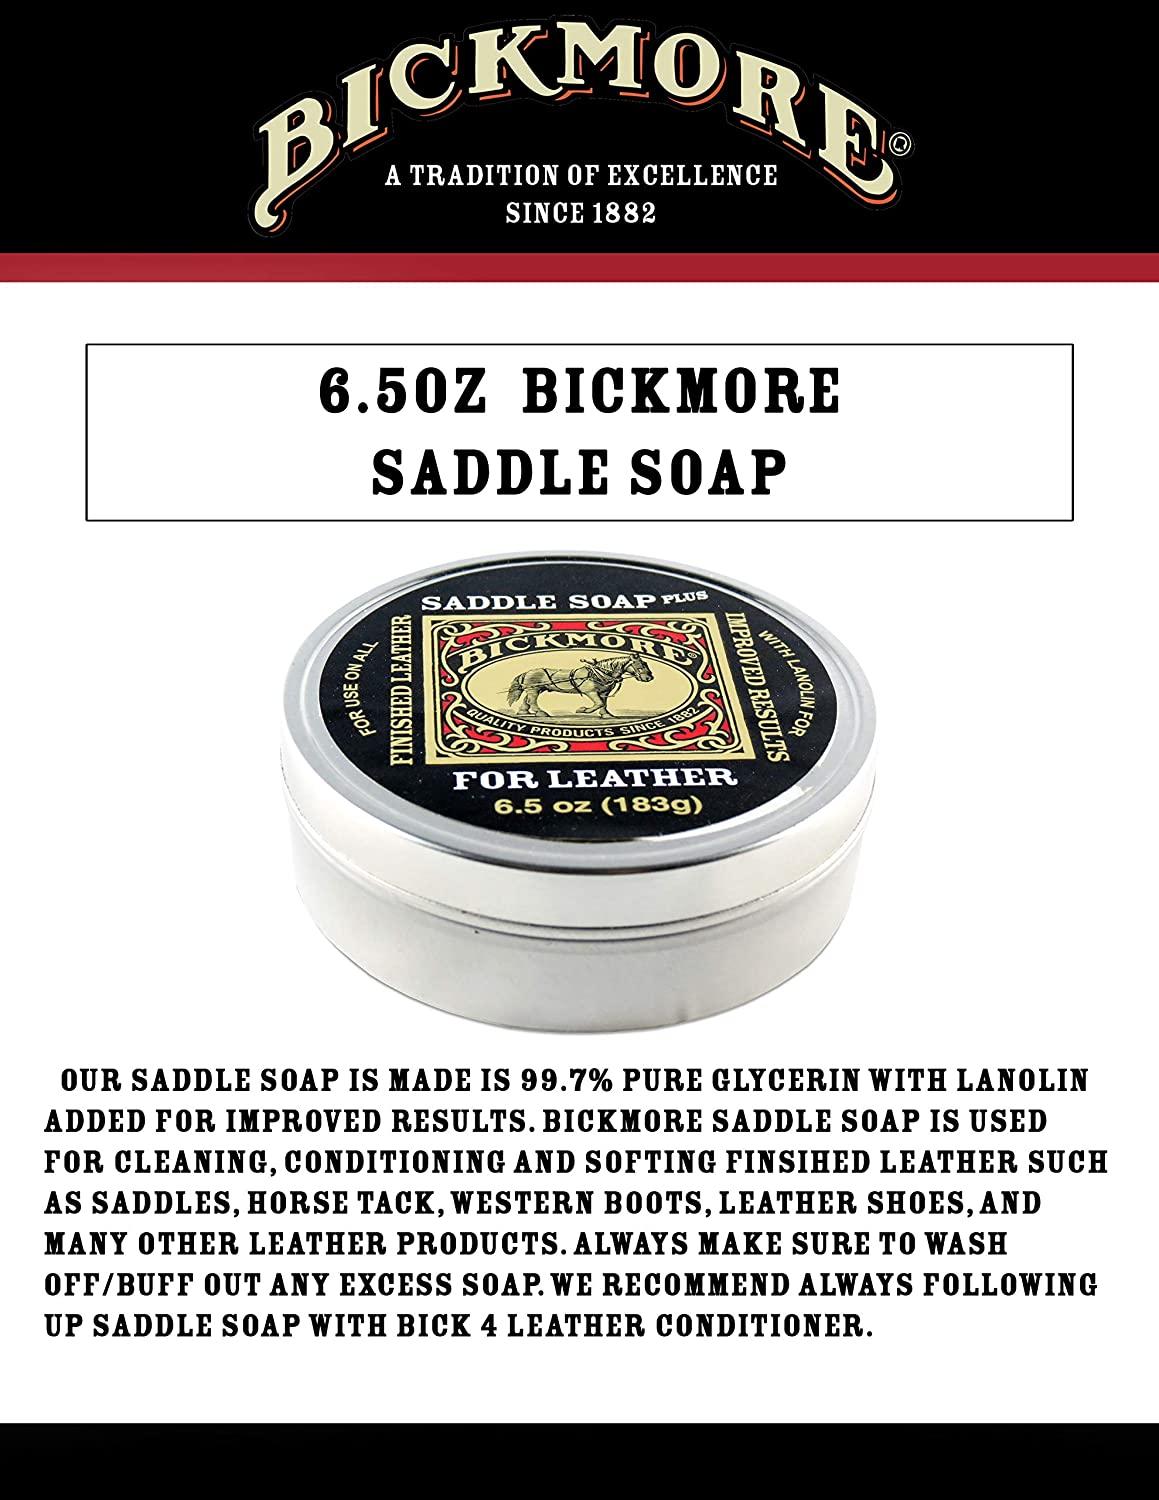 Bickmore Saddle Soap Plus - 6.5oz - Leather Cleaner & Conditioner with  Lanolin - Restorer Moisturizer and Protector